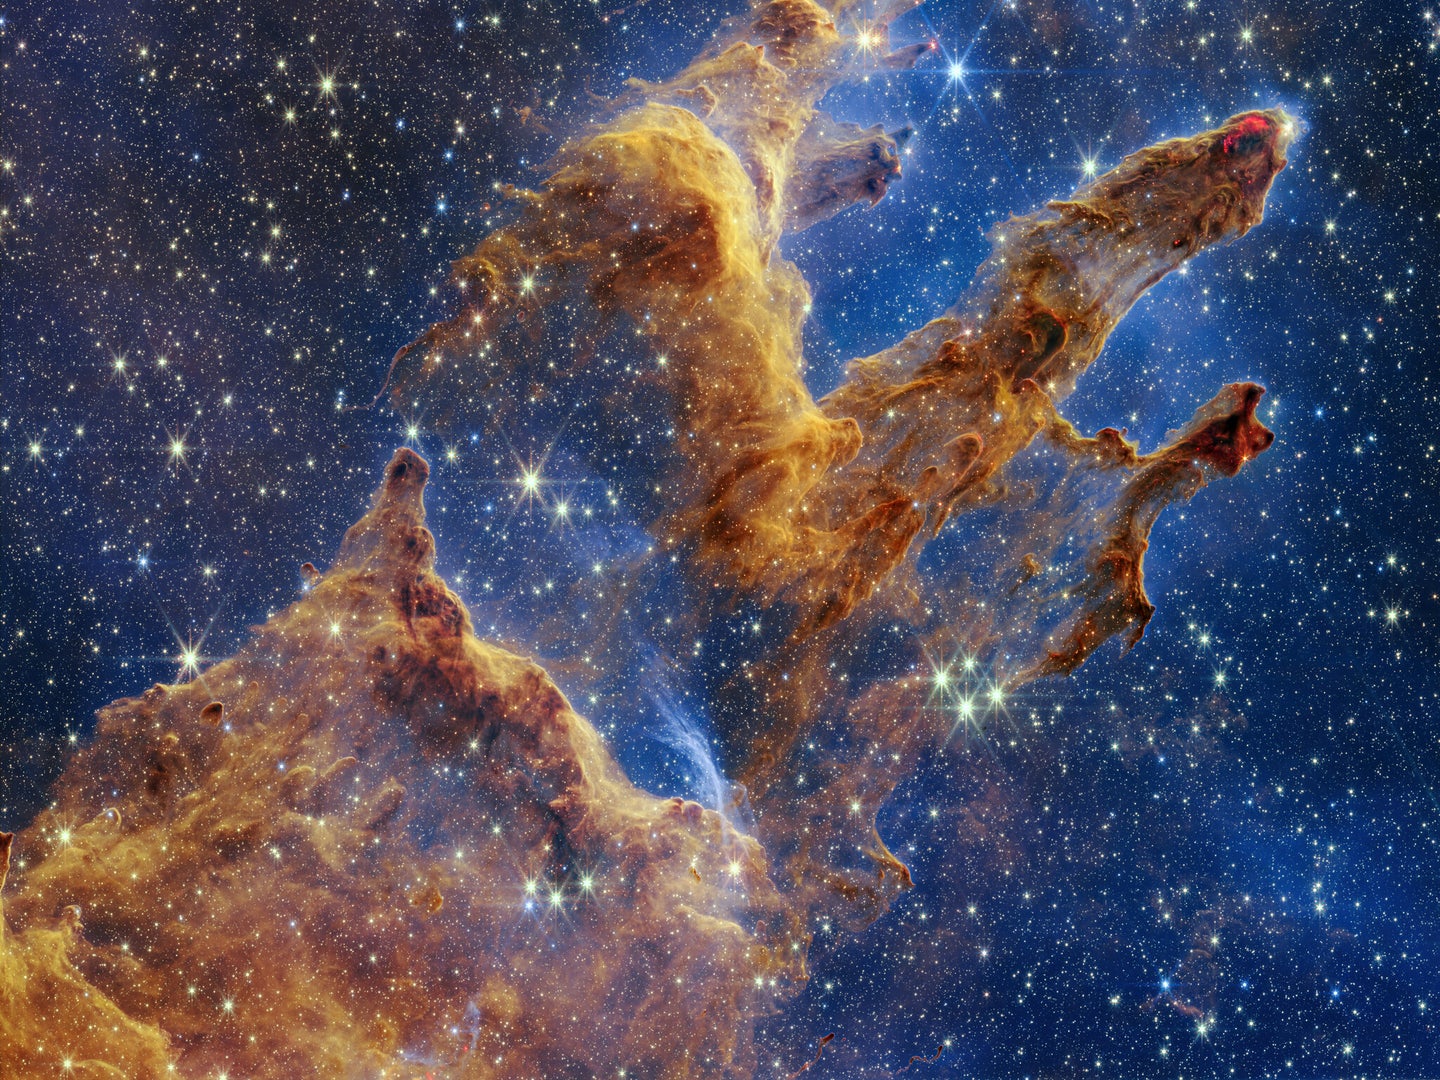 The Pillars of Creation in the Eagle Nebula